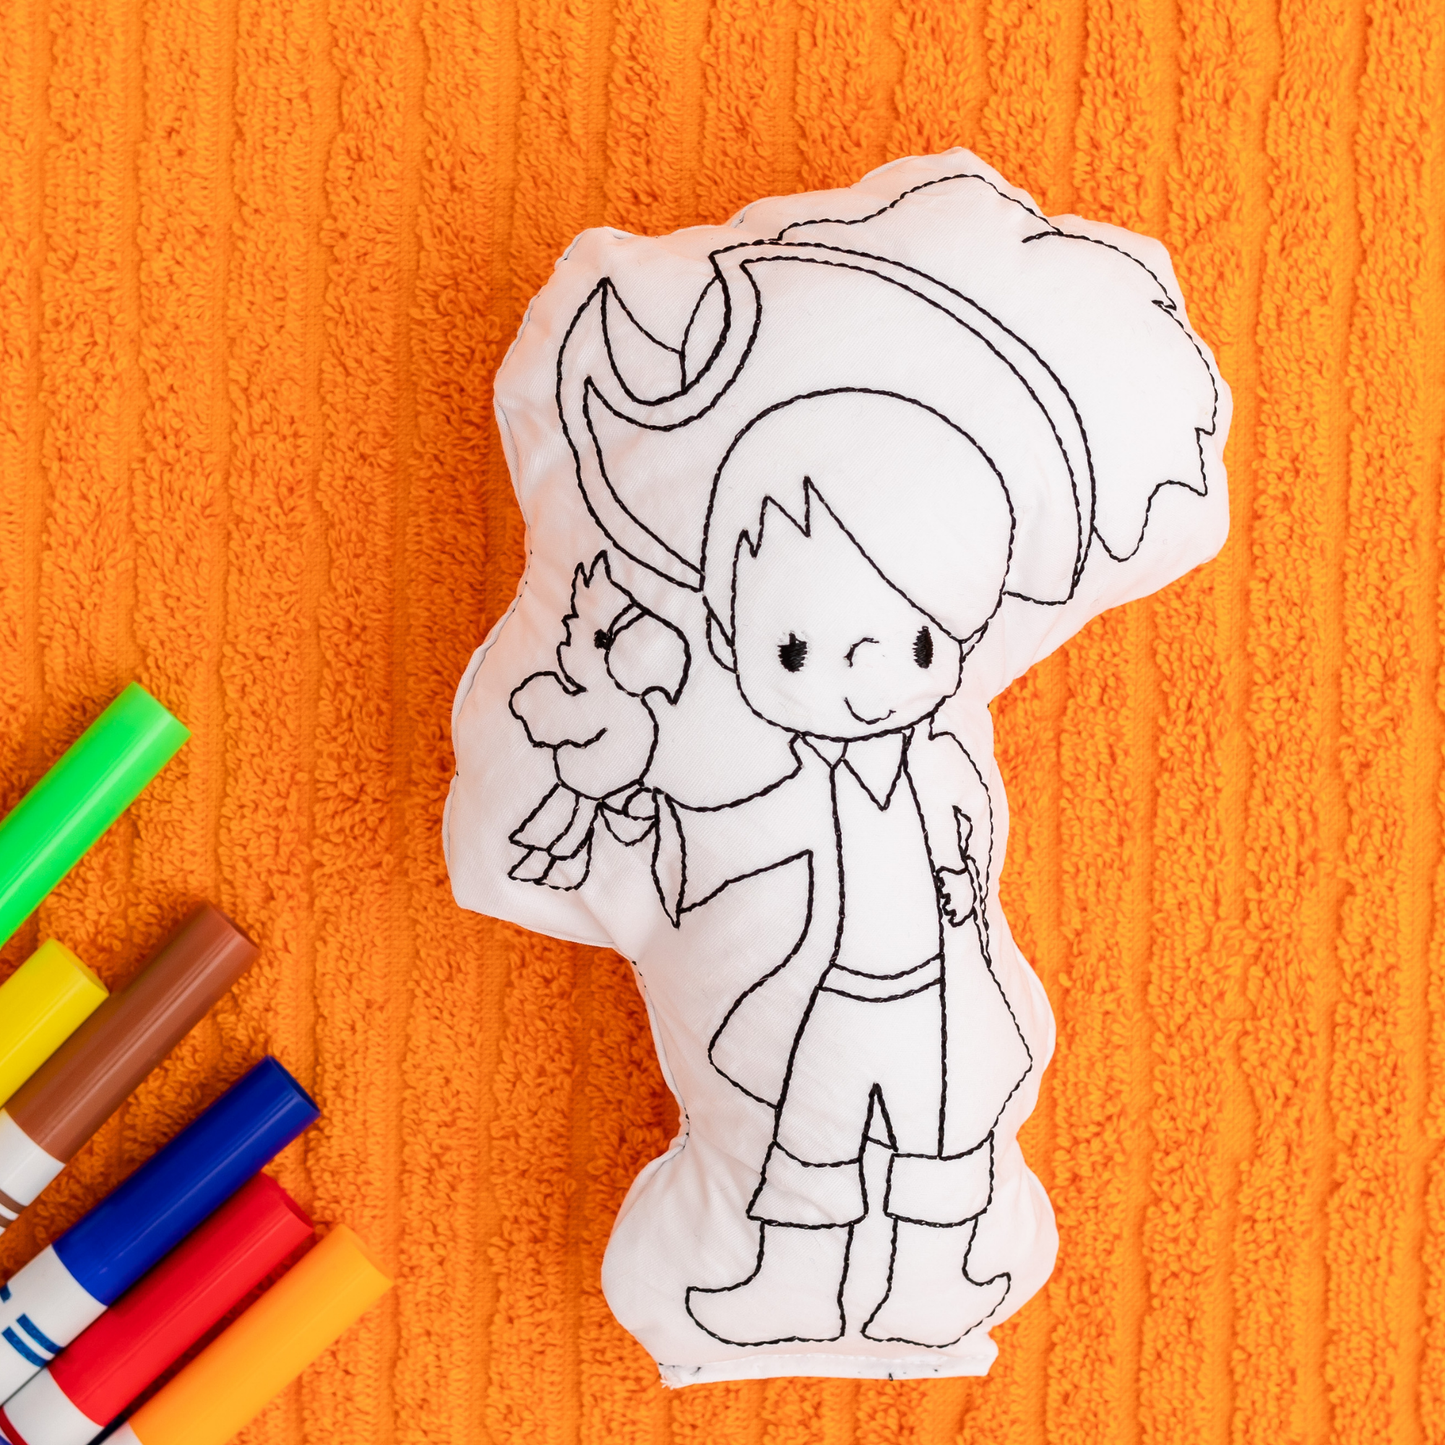 Pirate Boy Doodle Doll Coloring Kit for Kids: Pirate Boy